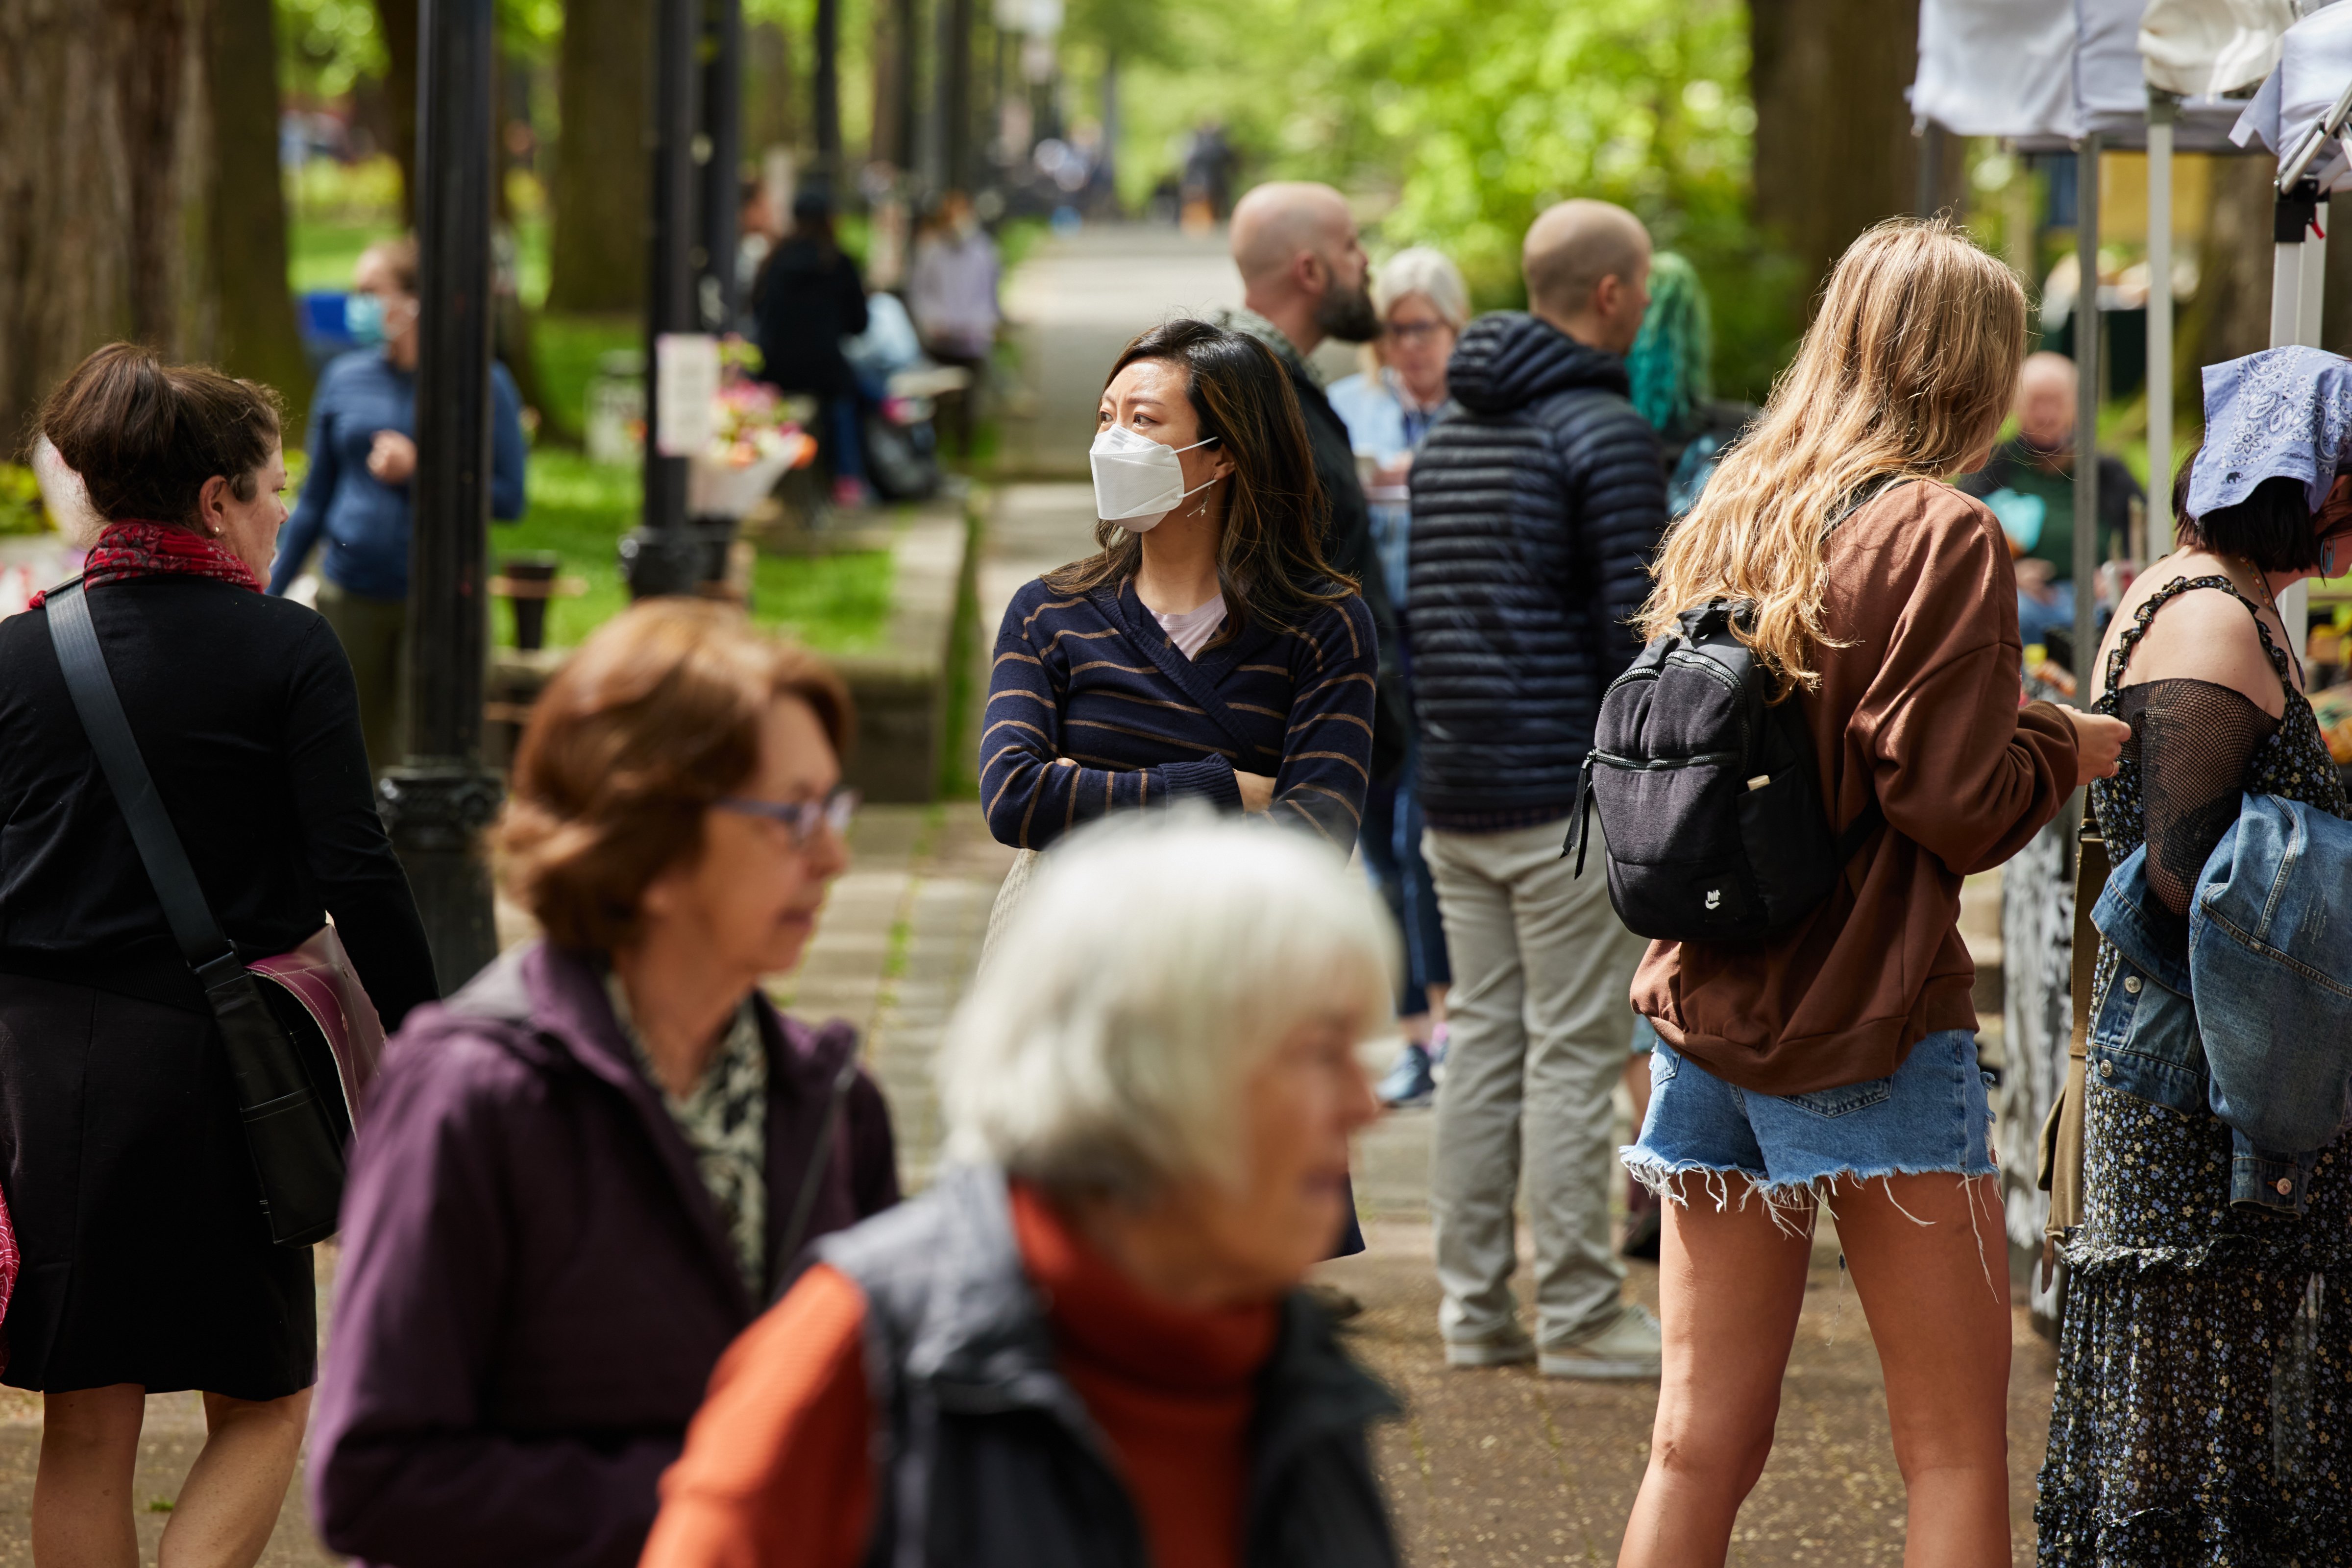 On Wednesday, May 4th, 2022 a mix of masked and unmasked individuals shop at the Portland Farmers Market in Shemanski Park in Portland, OR. (Leah Nash for the Washington Post)